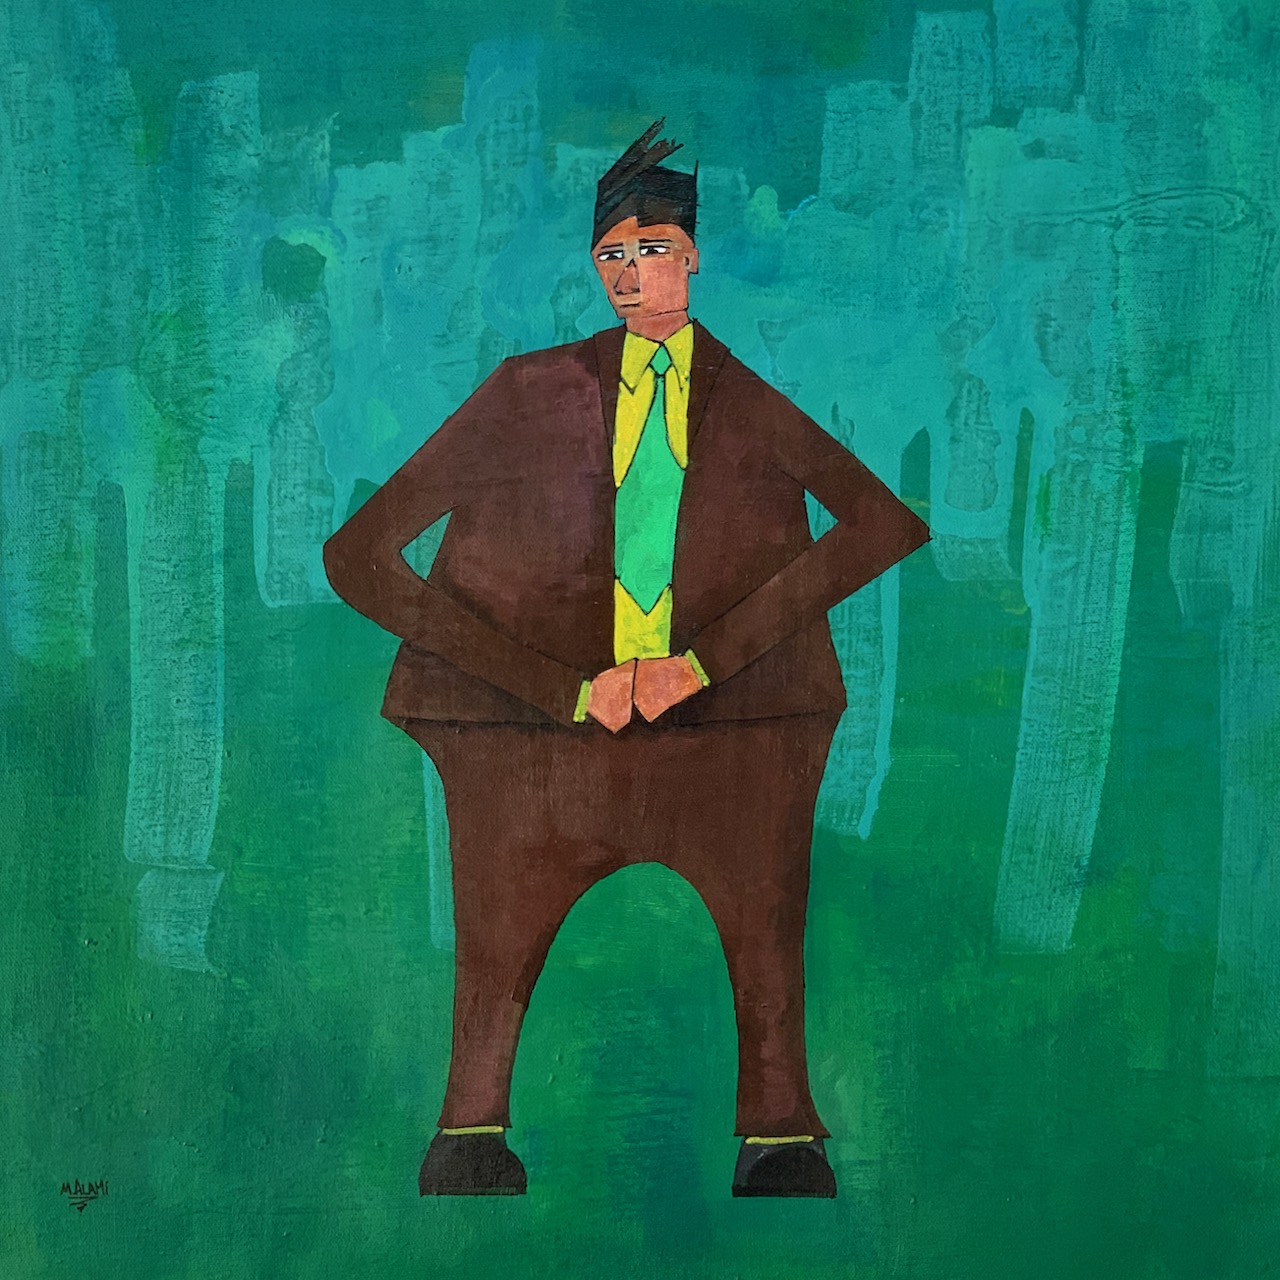 Painting of Man in a suit